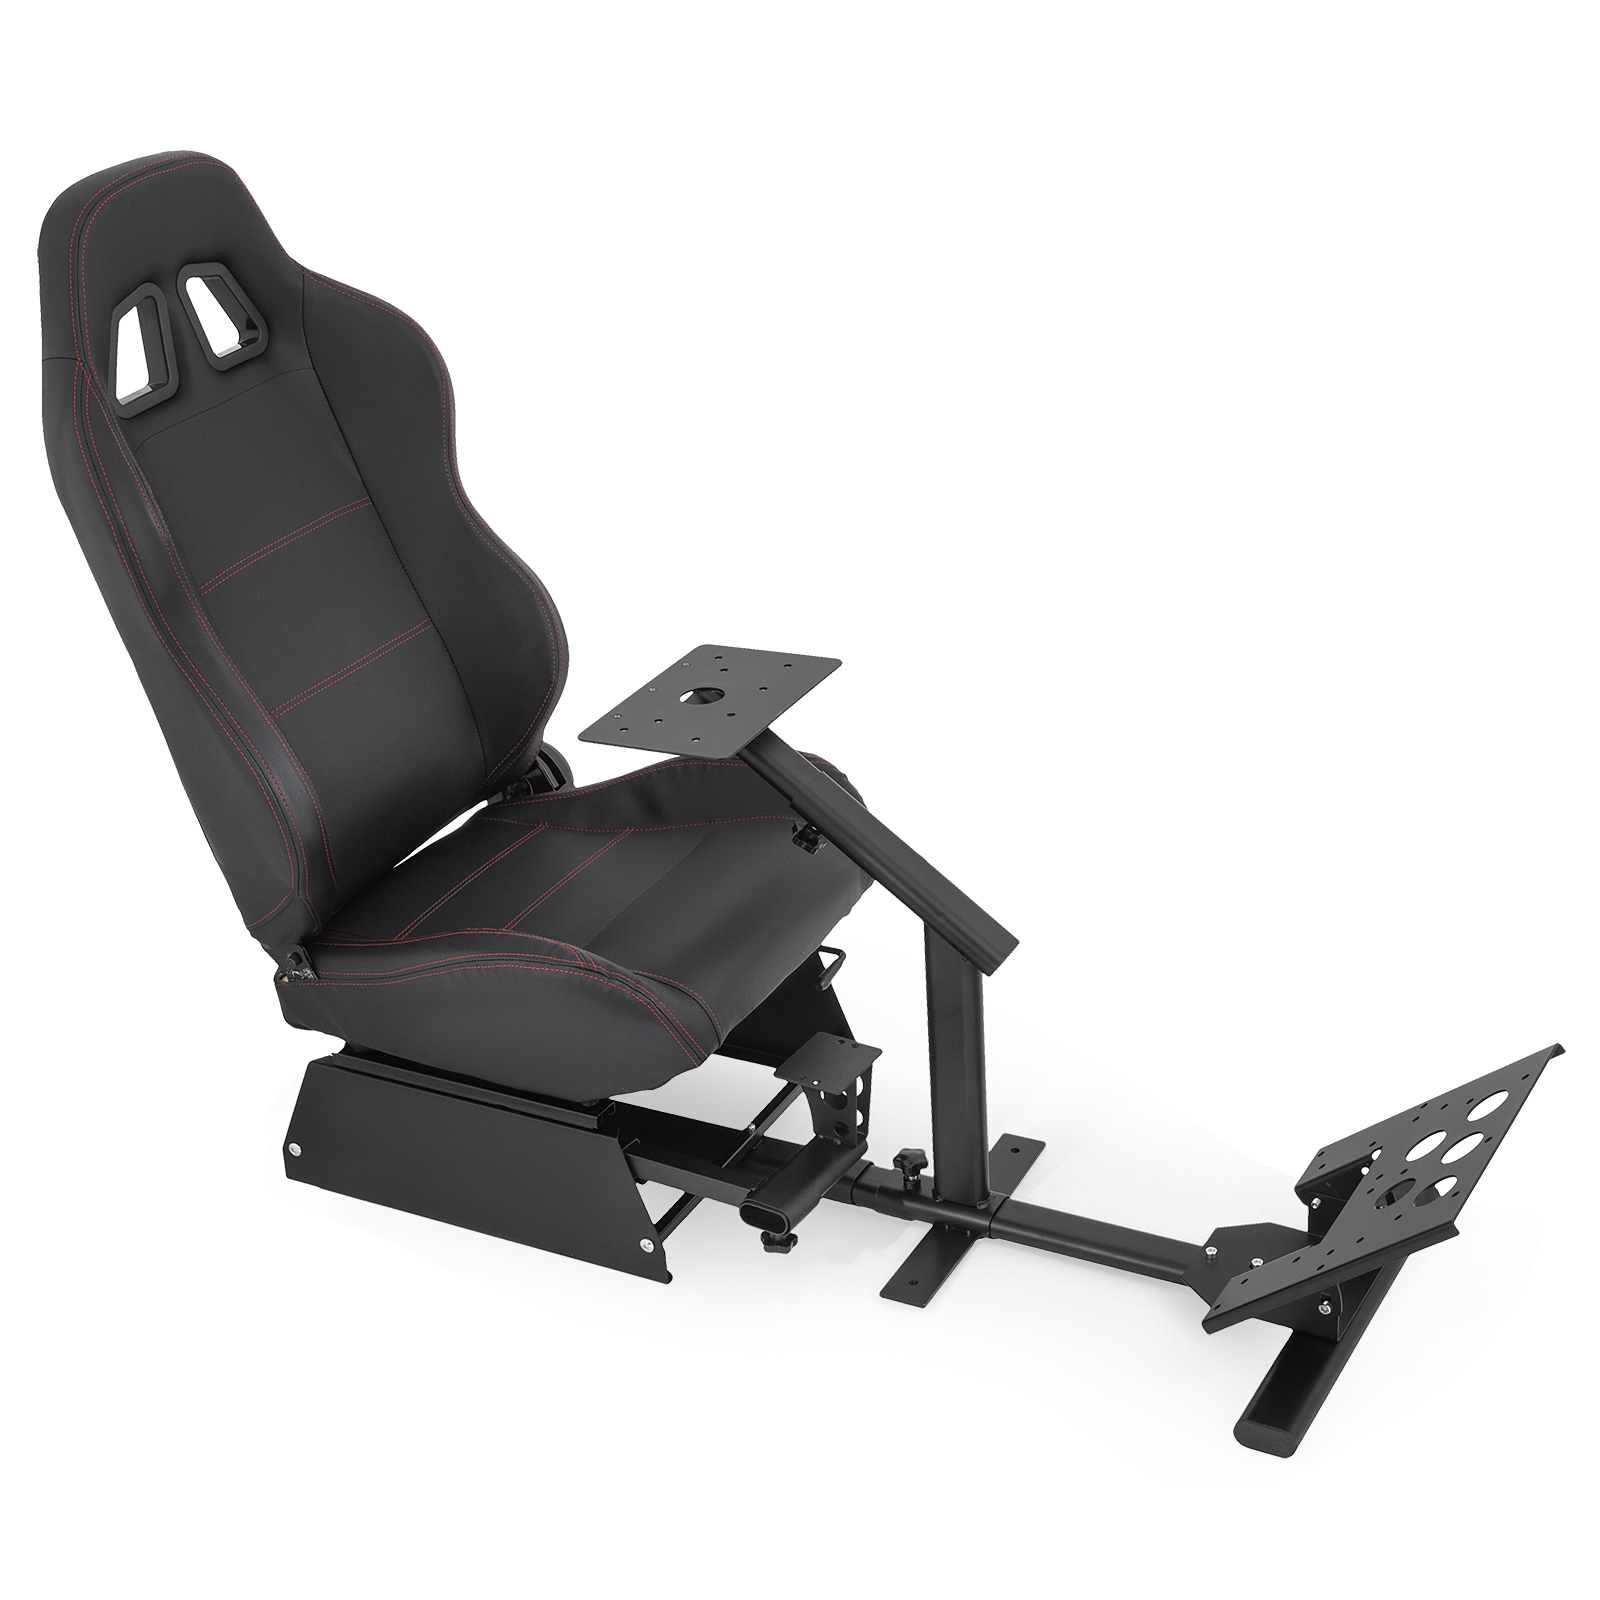 Racing Xbox One Gaming Chair How To Connect Wireless